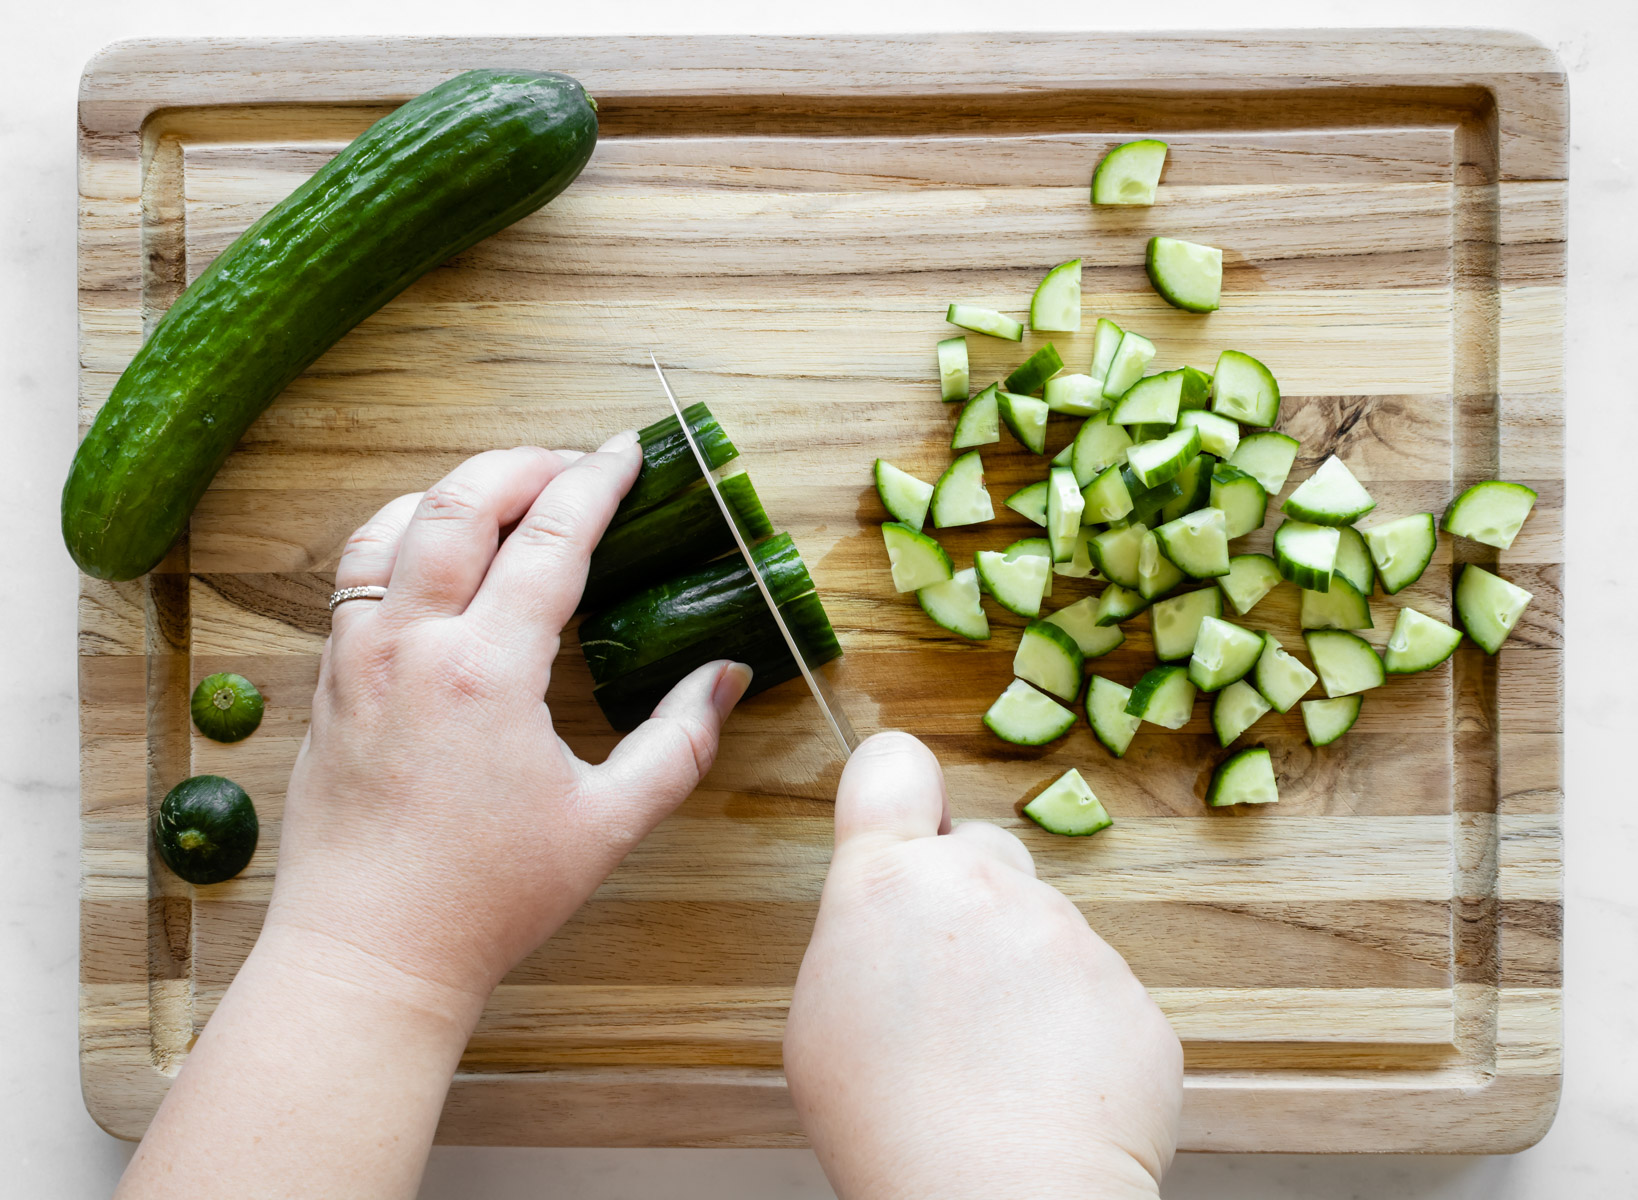 hands chopping cucumbers with a knife on a wooden cutting board.